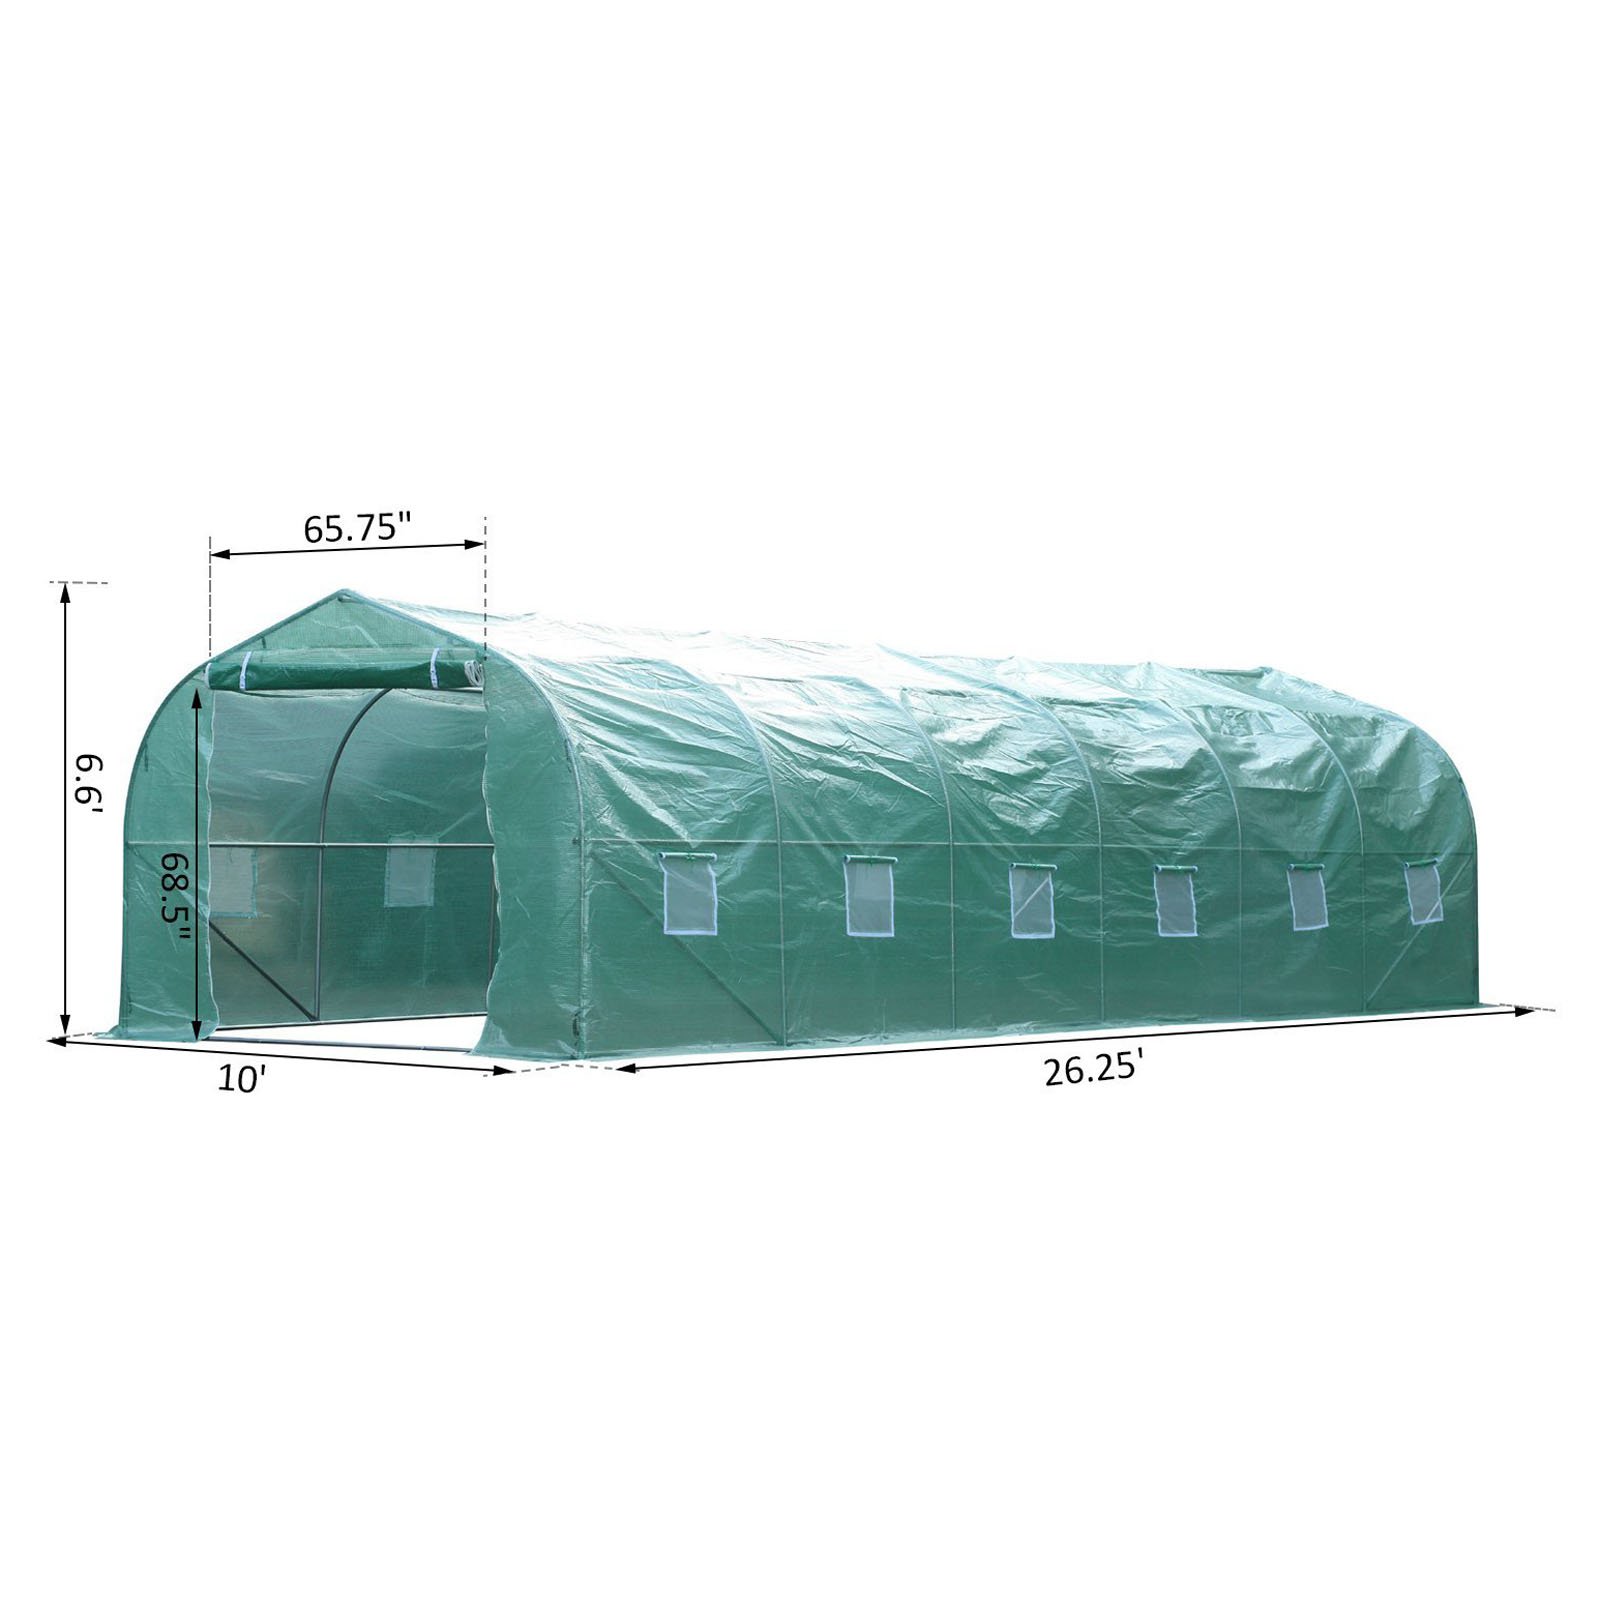 Outsunny 26' x 10' x 6.5' Large Outdoor Heavy Duty Walk-In Greenhouse with 12 Windows & Netted Ventilation Screens, White - image 2 of 7